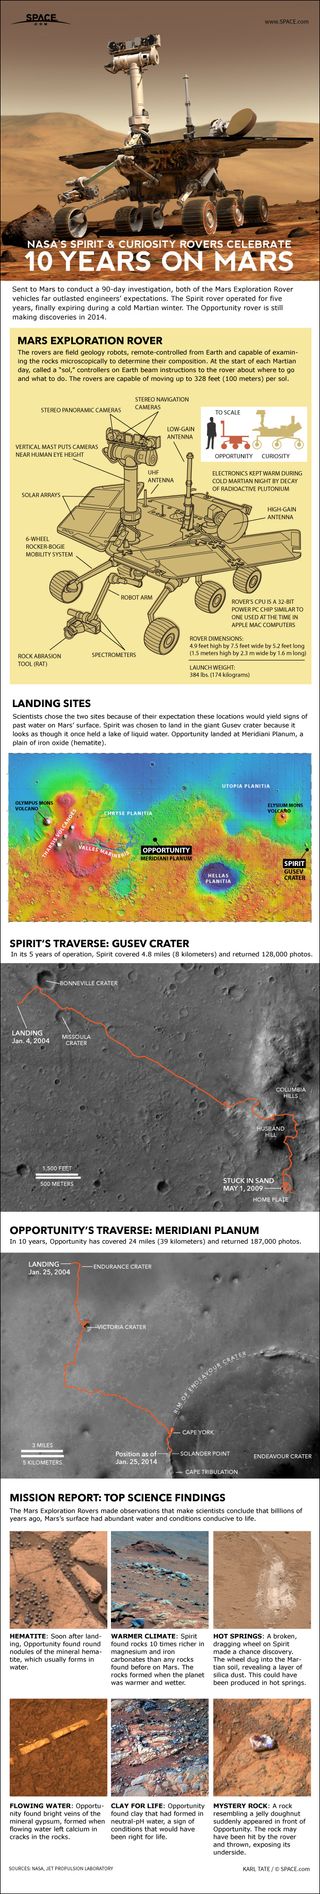 For more than 10 years the robots have roved across Mars, making exciting discoveries about water in the planet's past. See the Mars rovers Spirit and Opportunity worked in this SPACE.com infographic.